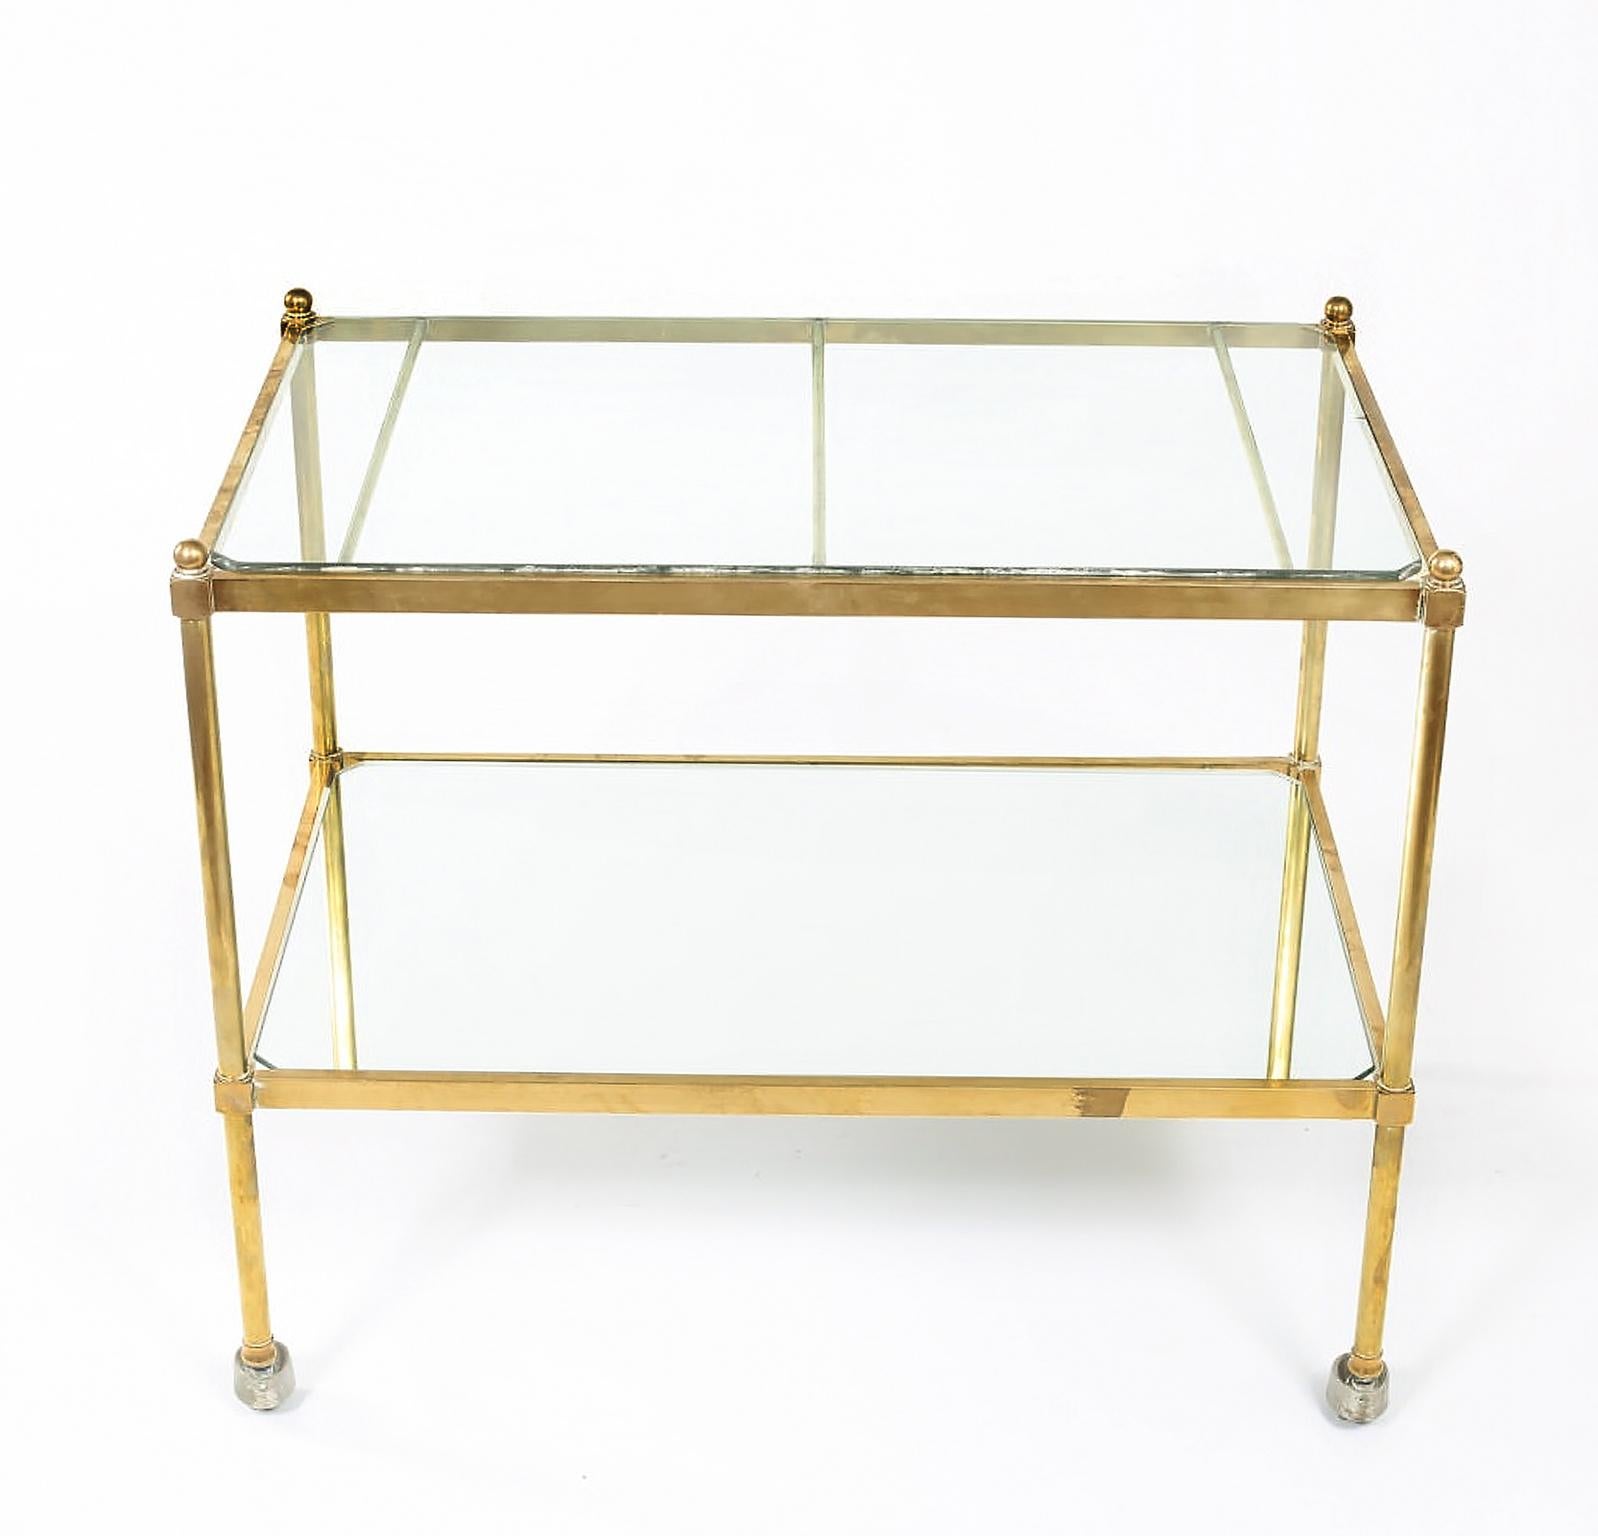 Stunning Italian two-tiered brass / glass / mirror bar cart. The top shelve is glass with the exception of the bottom shelve which is mirror shelve. The bar cart is in good vintage condition with wear appropriate to age / use. The cart measure about